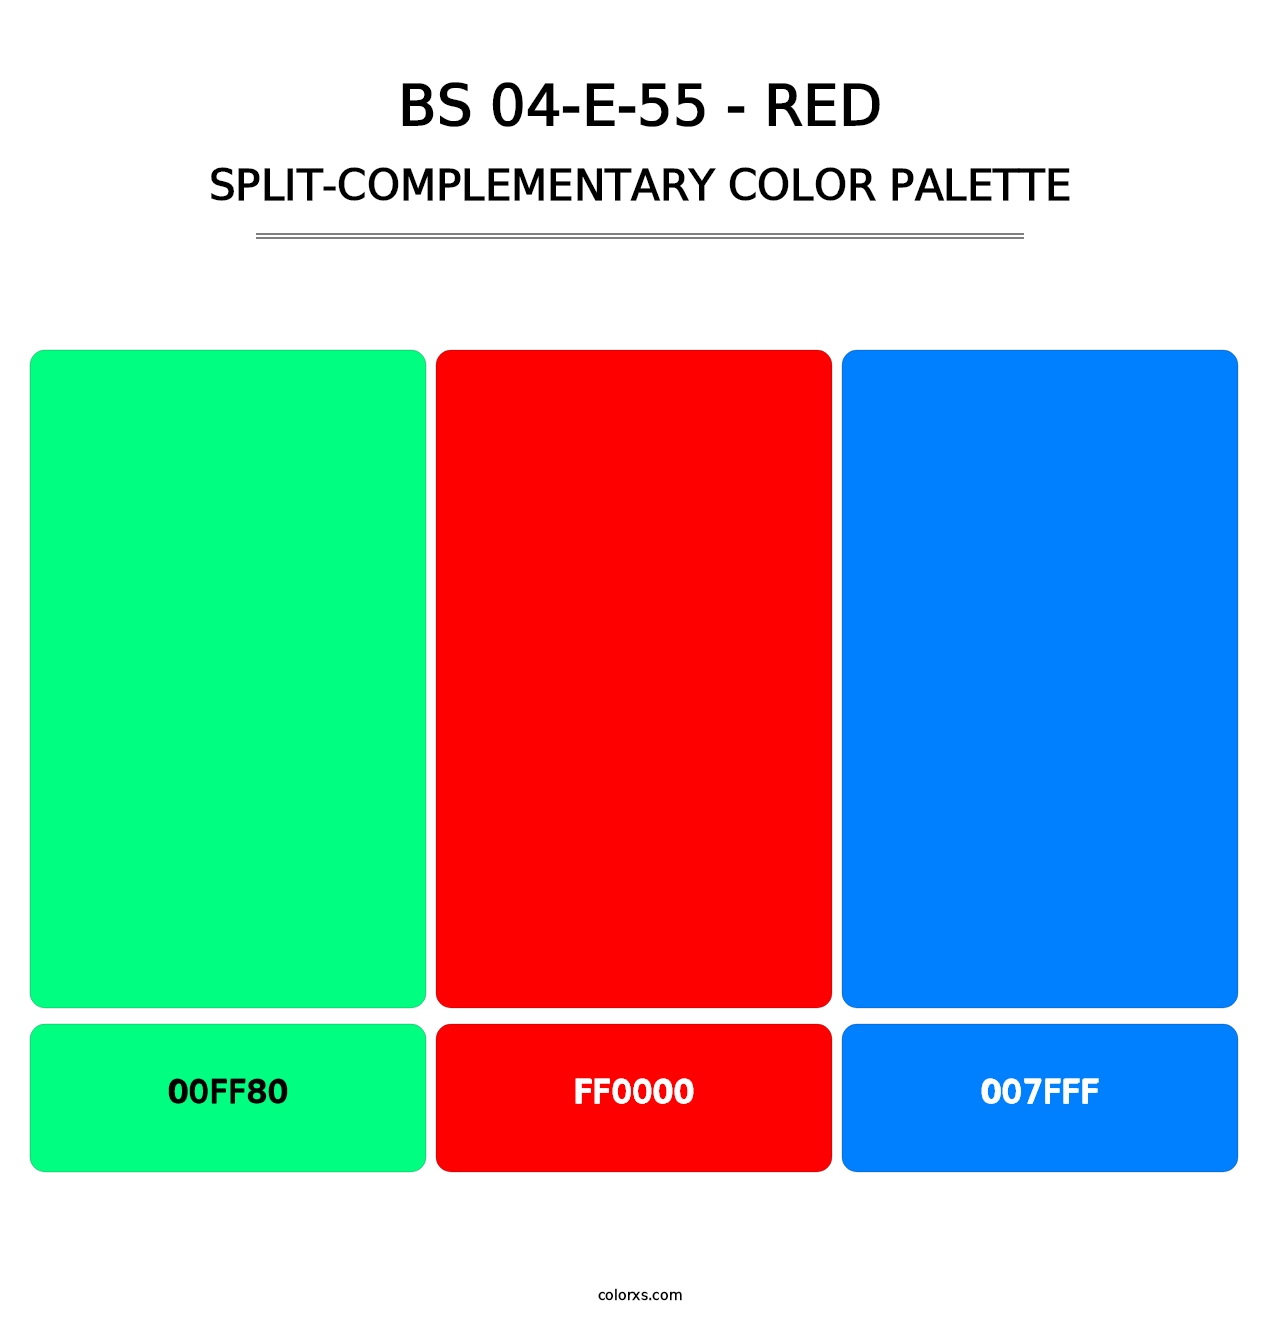 BS 04-E-55 - Red - Split-Complementary Color Palette